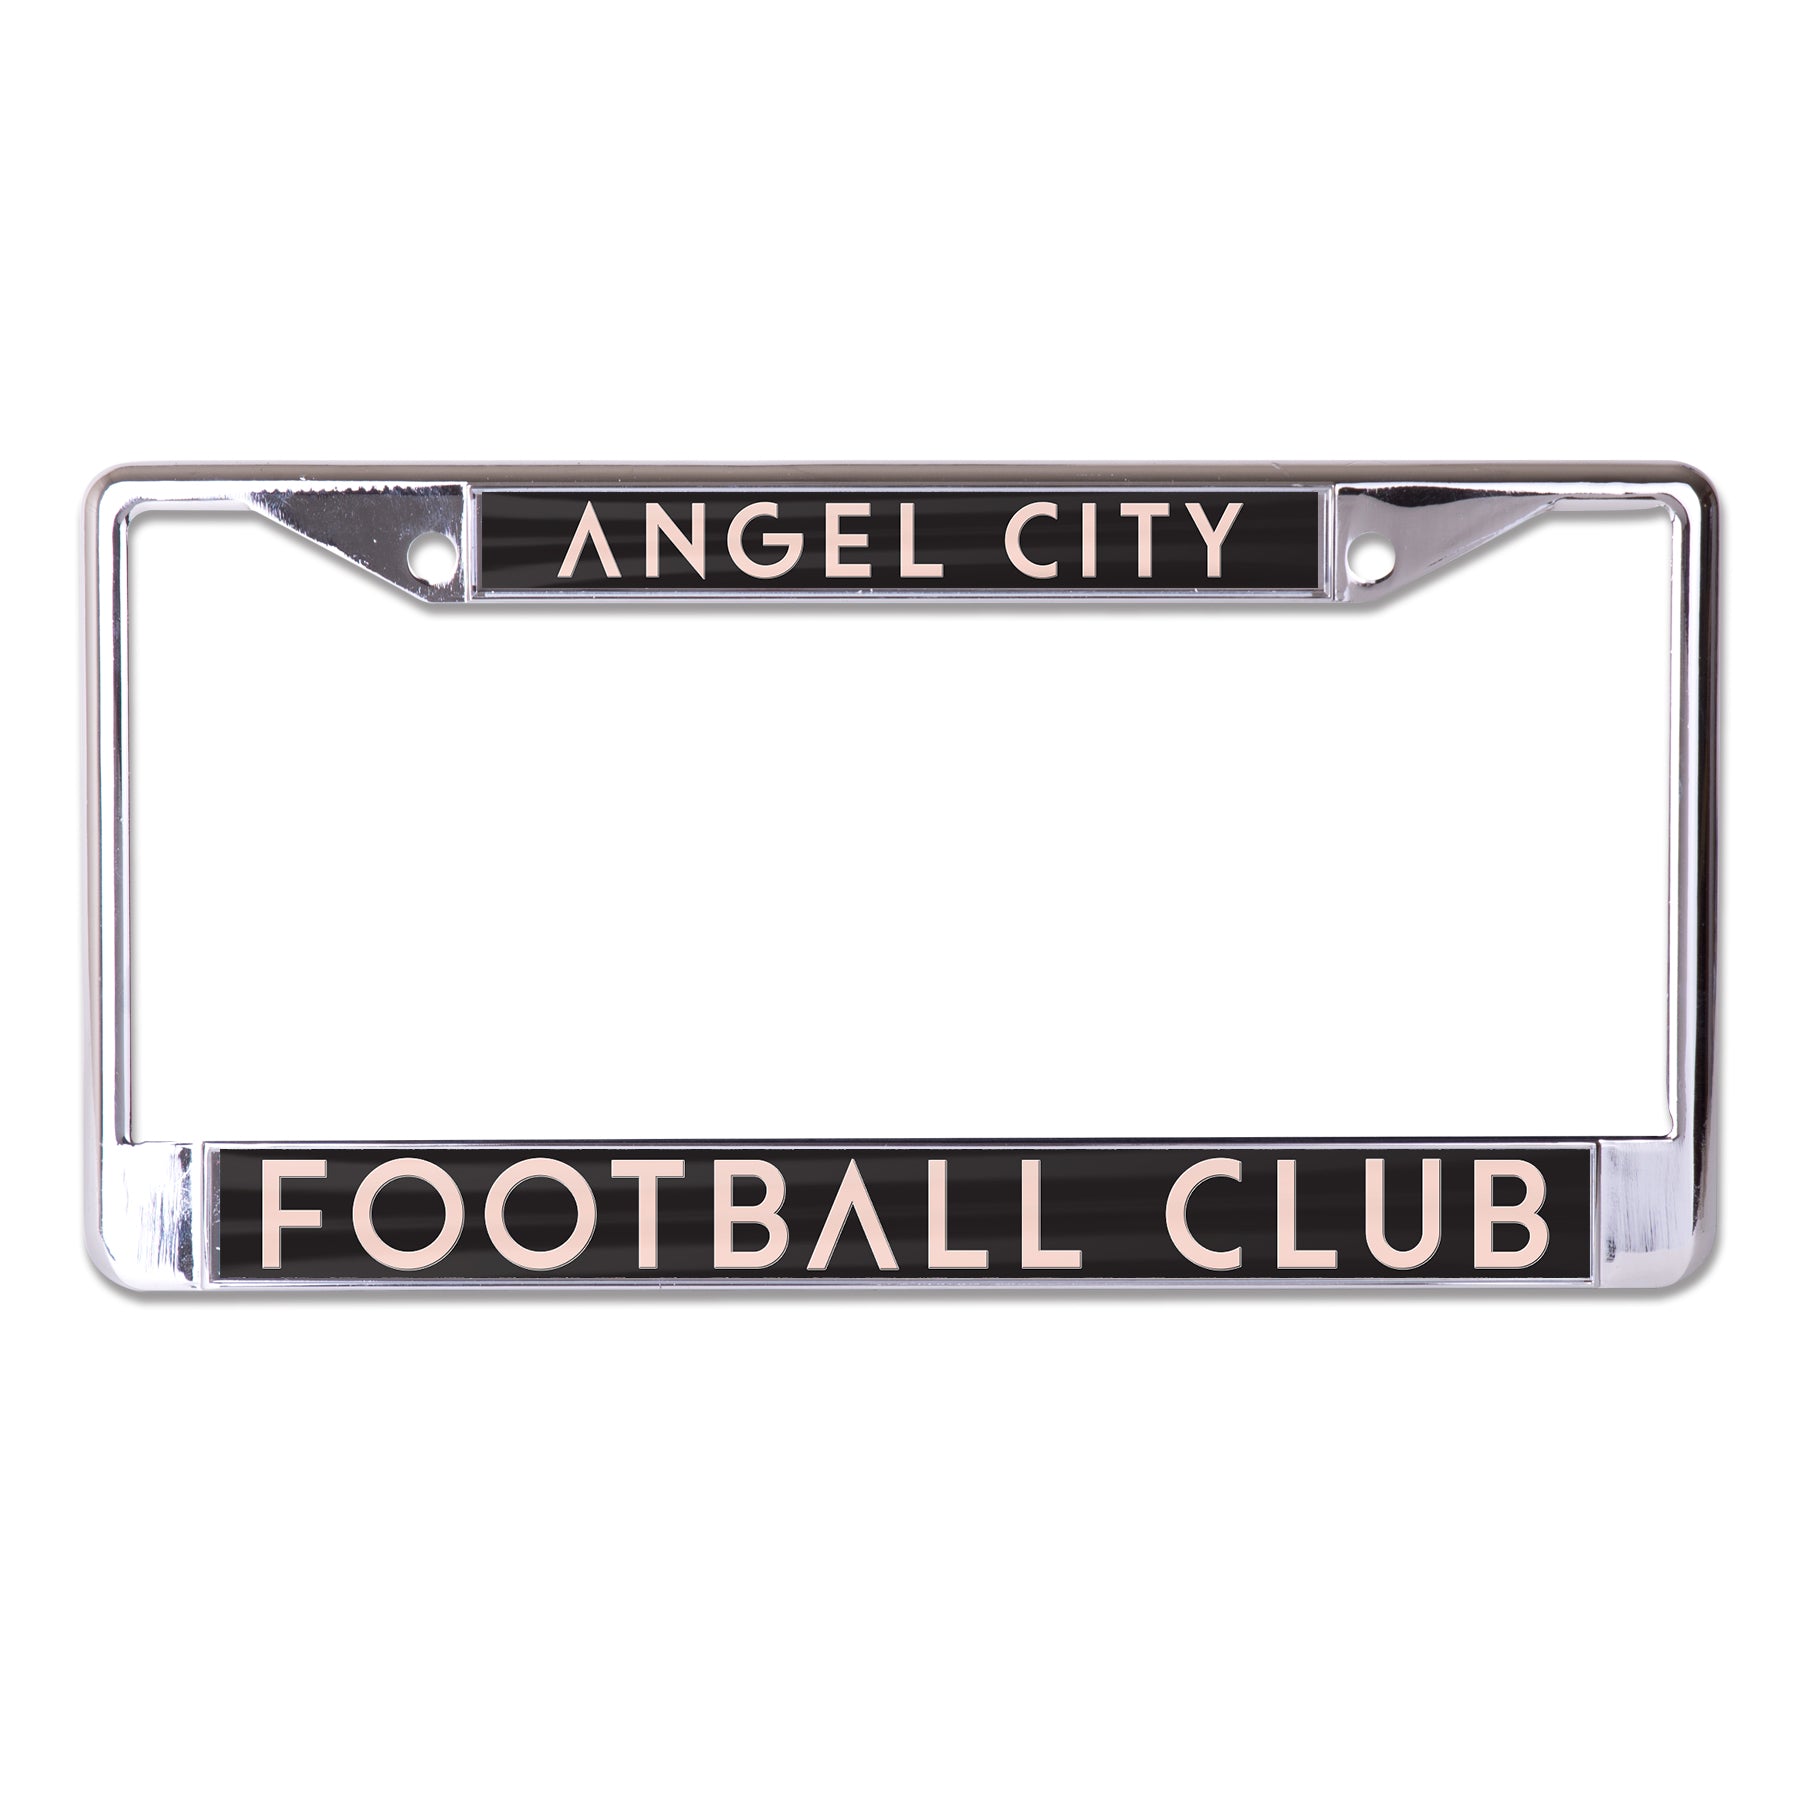 Angel City Football Club - Headed to Banc of California Stadium today?! 👀  Don't forget to grab some of your favorite Angel City gear in-store 🙌